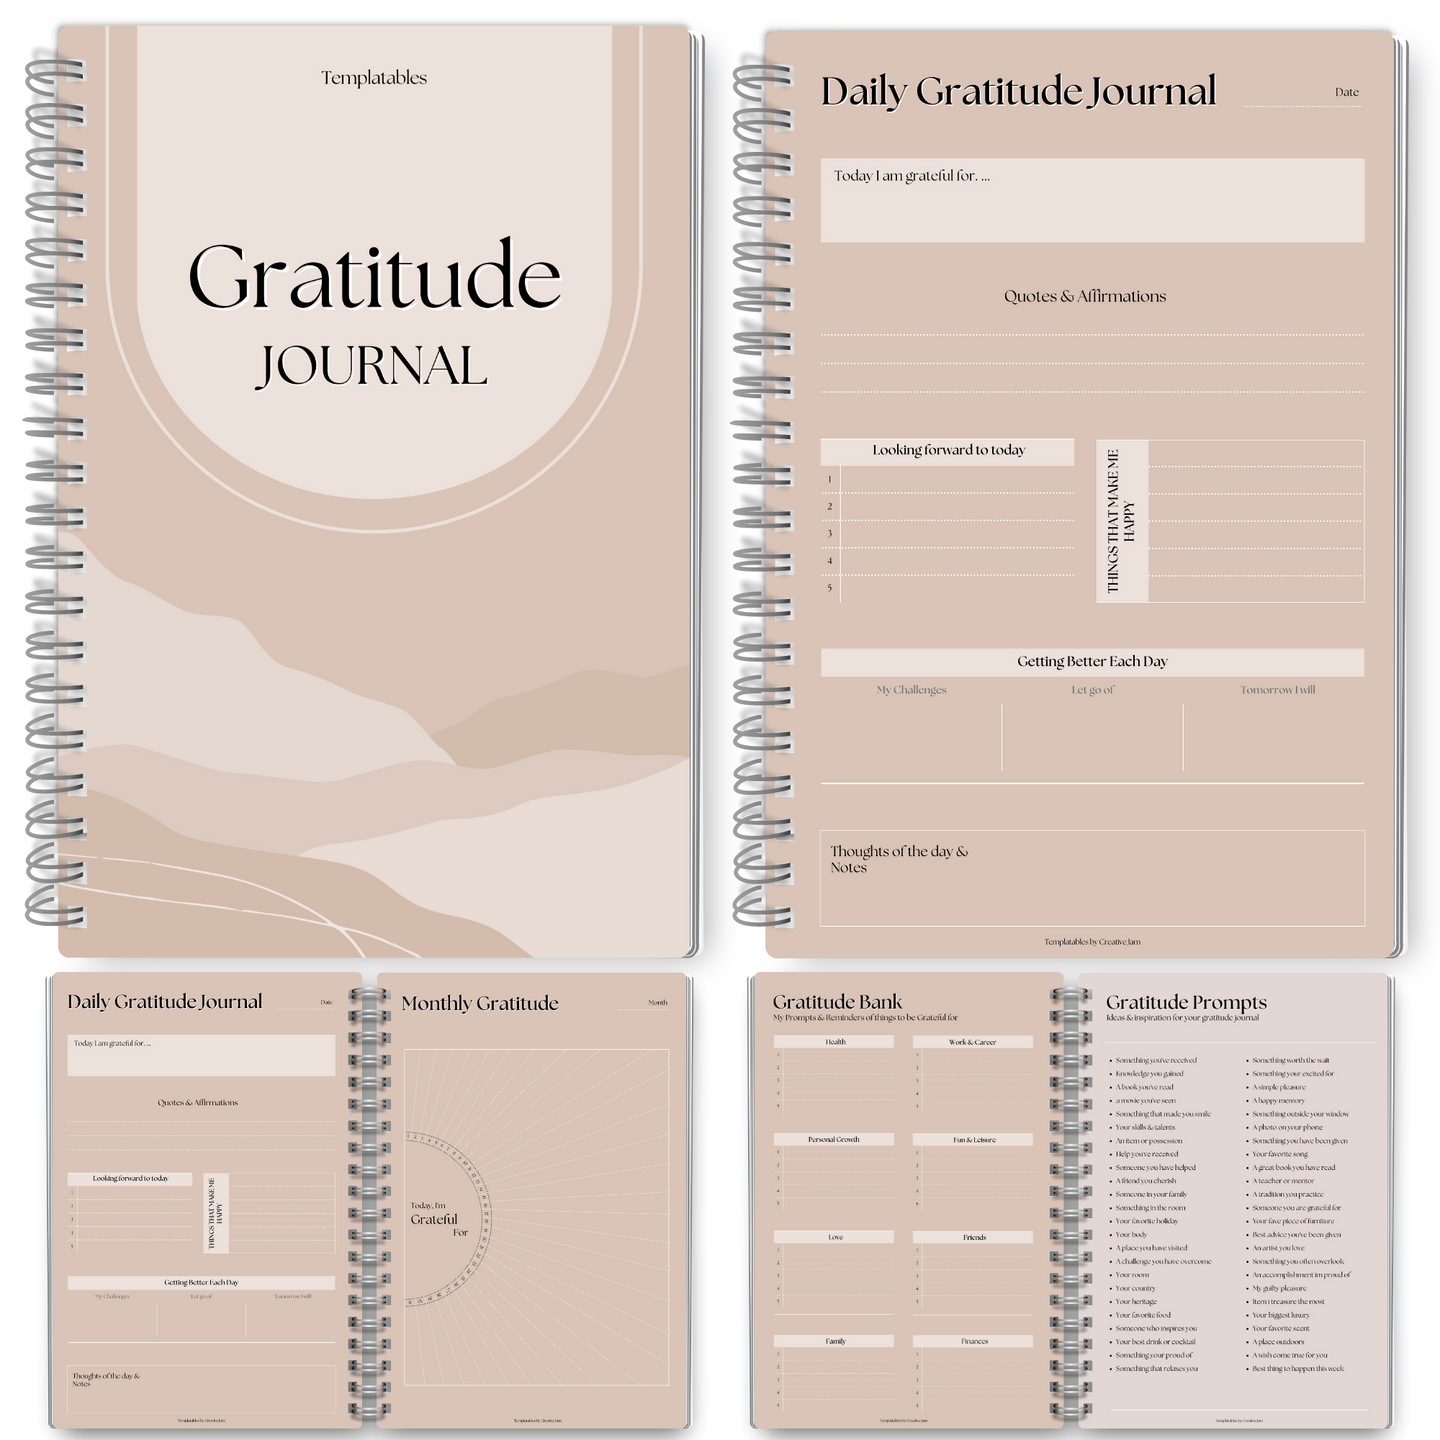 Gratitude & Mindfulness Journal | Gratitude Template, Self Care Planner, Positivity Diary, Daily Journal, Gratitude Jar, Wellness, Manifestation Journal | A5 Lux